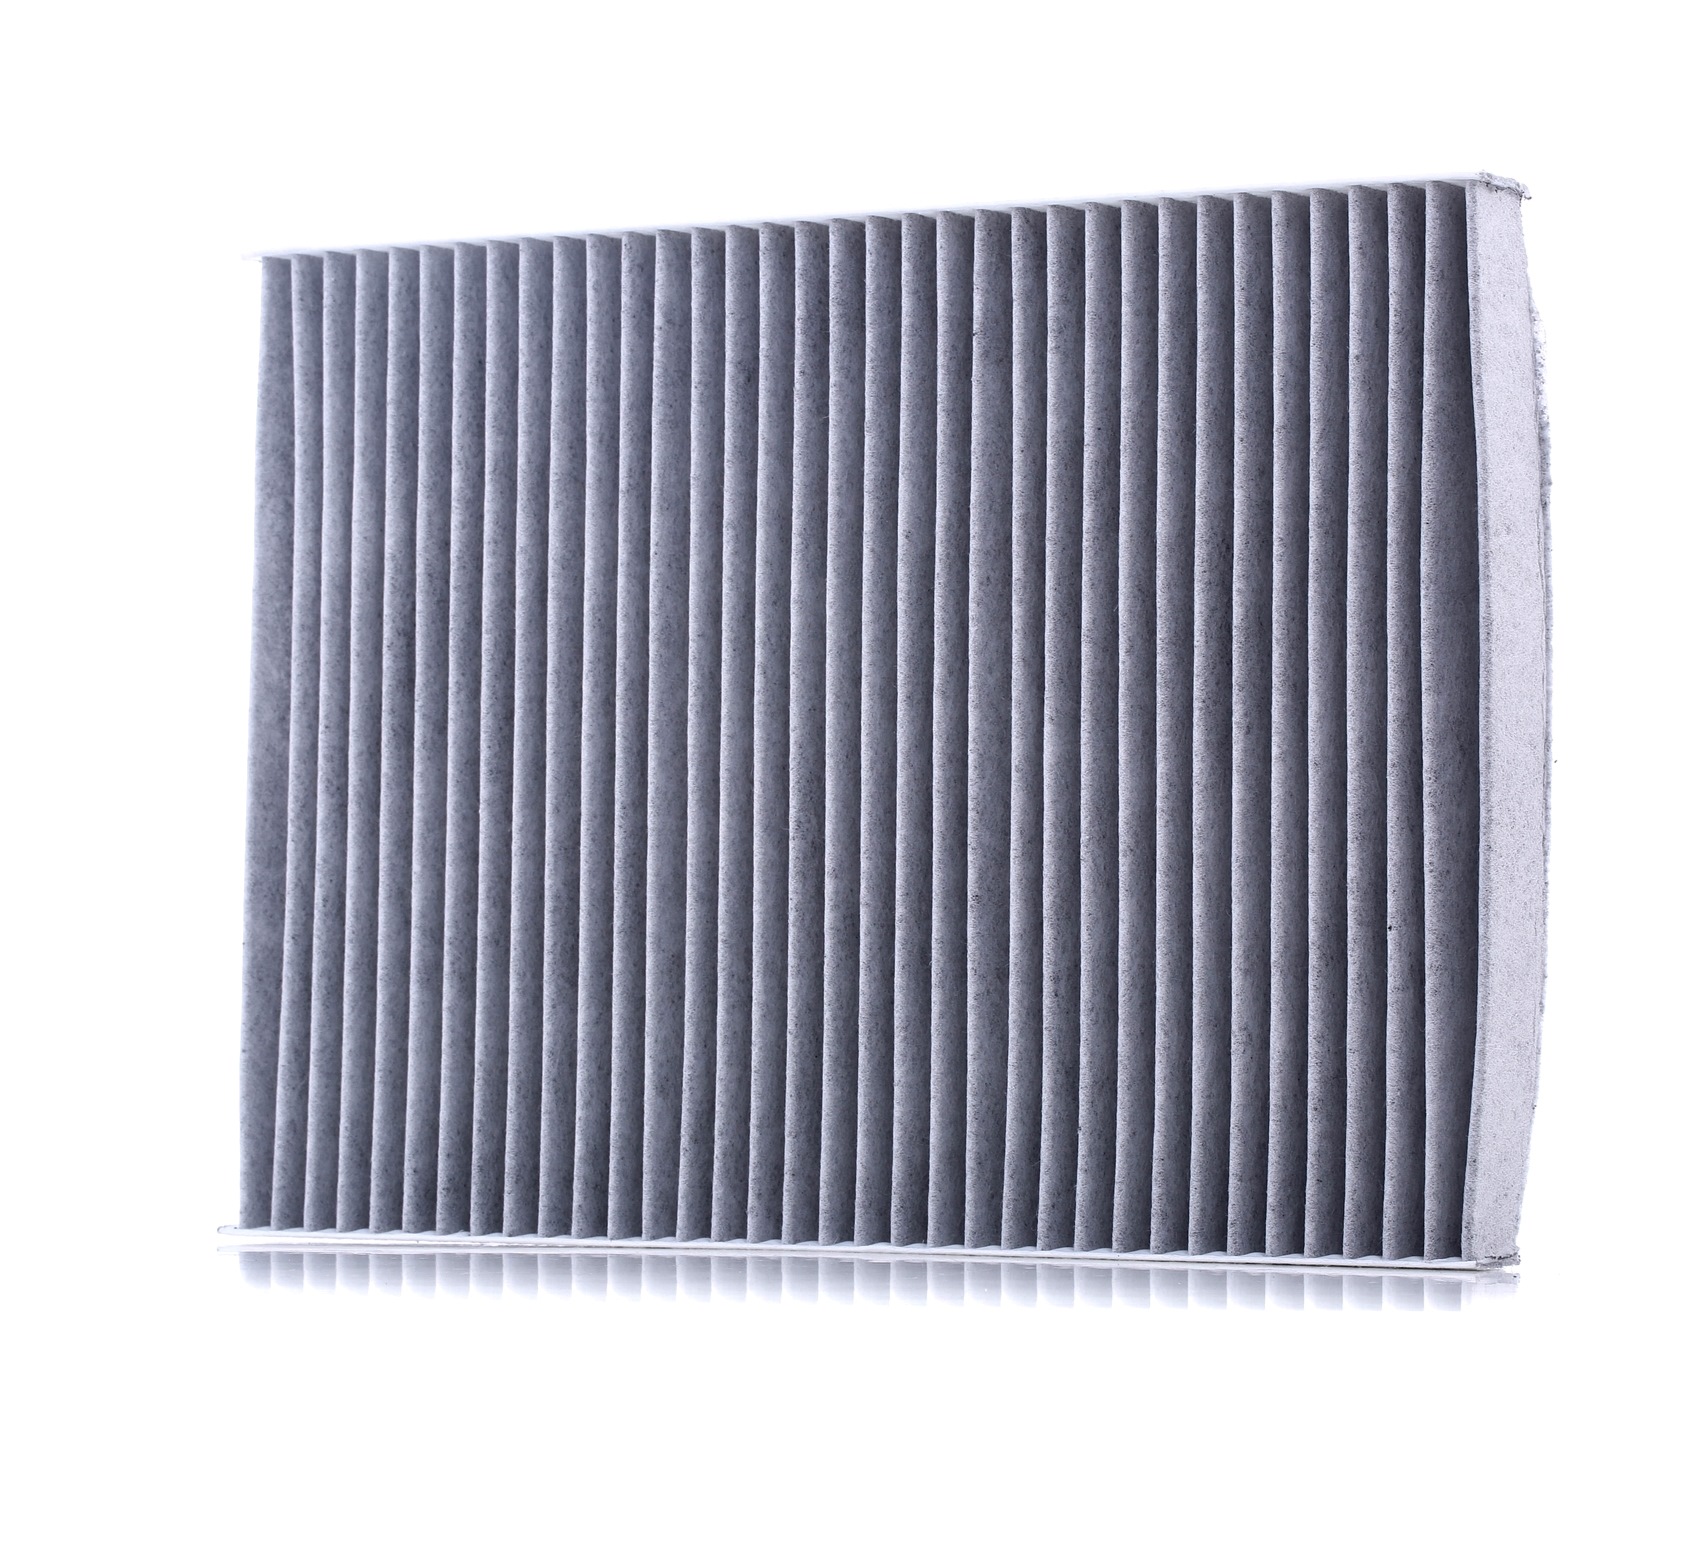 Audi A2 Aircon filter 7243780 UFI 54.109.00 online buy